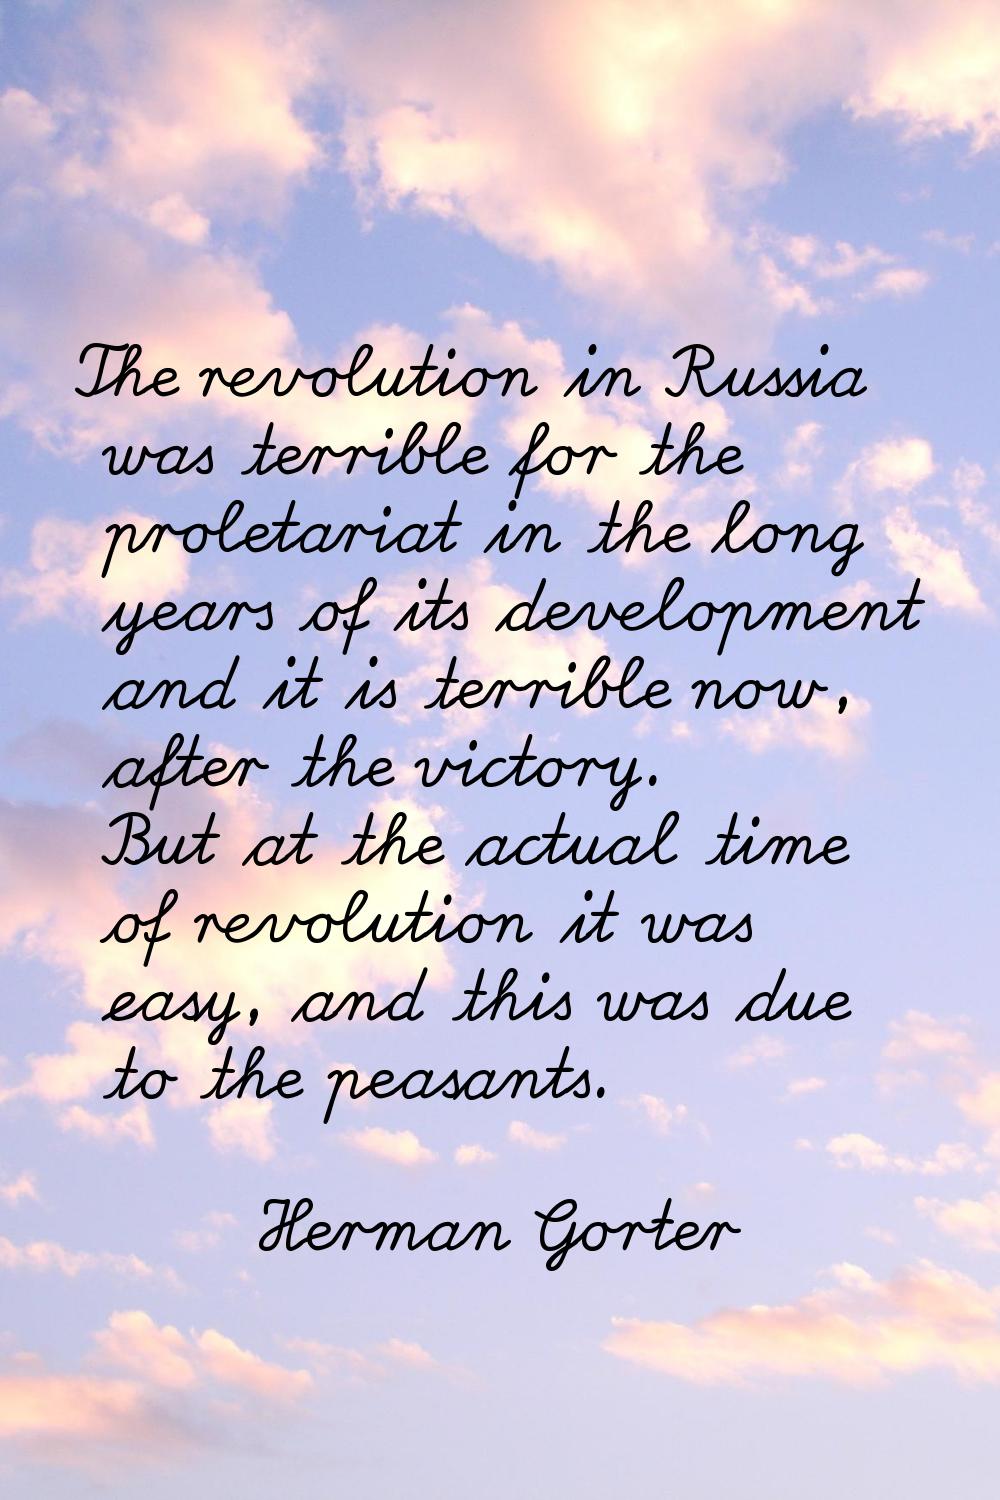 The revolution in Russia was terrible for the proletariat in the long years of its development and 